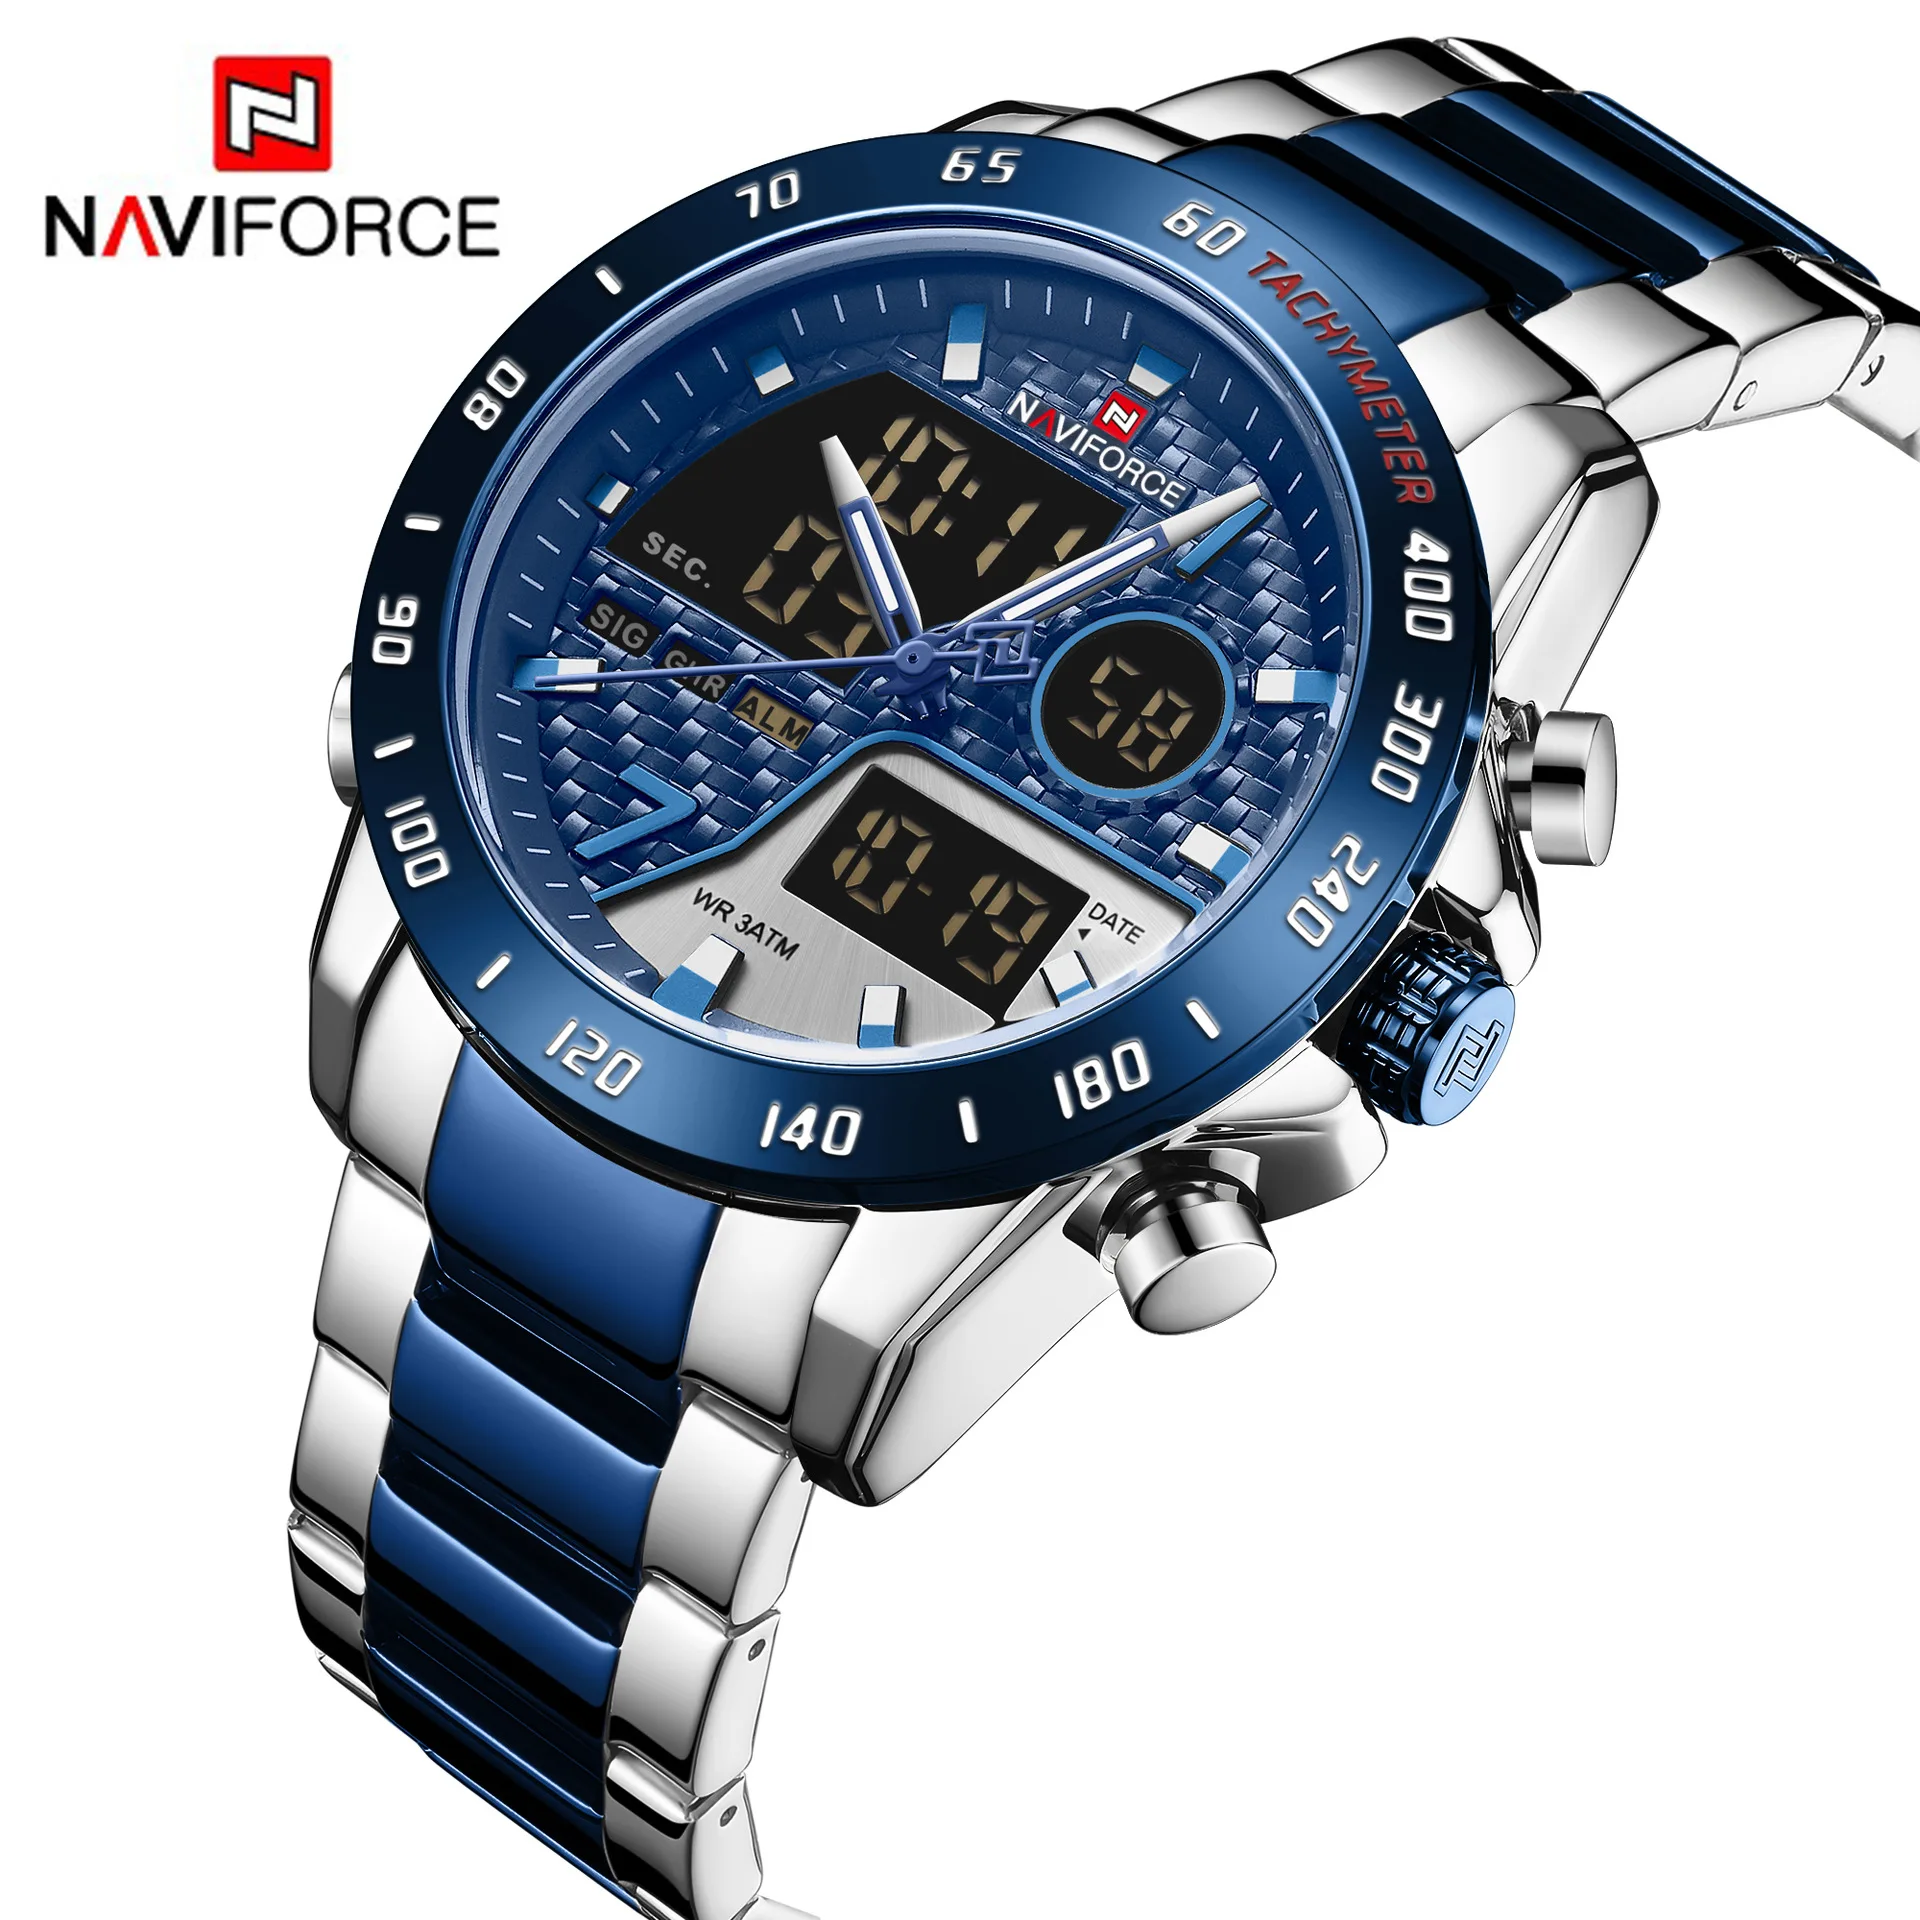 

NAVIFORCE 9171 Hot sell top brand luxury stainless steel high quality japan movement reloj naviforce men wrist watches, 5 colors